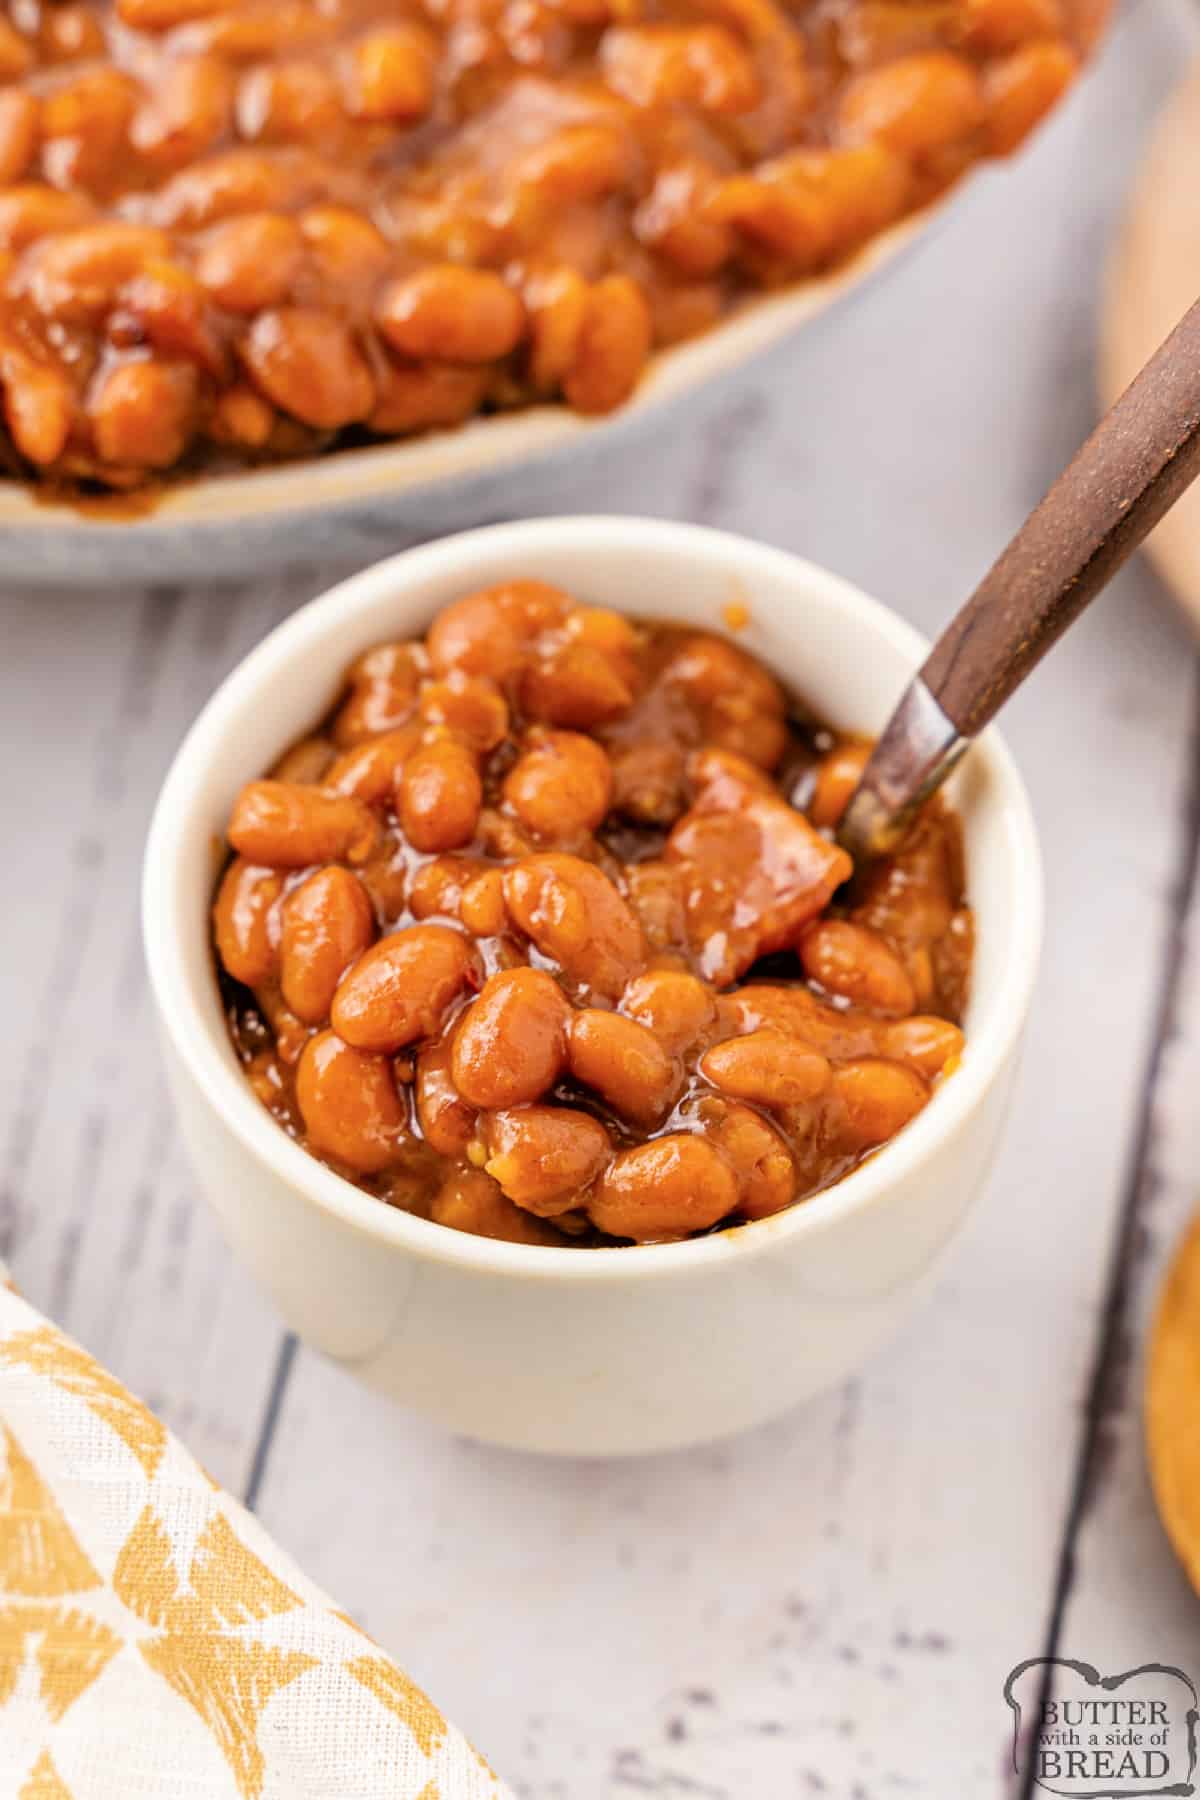 Baked beans mixed with apple pie filling